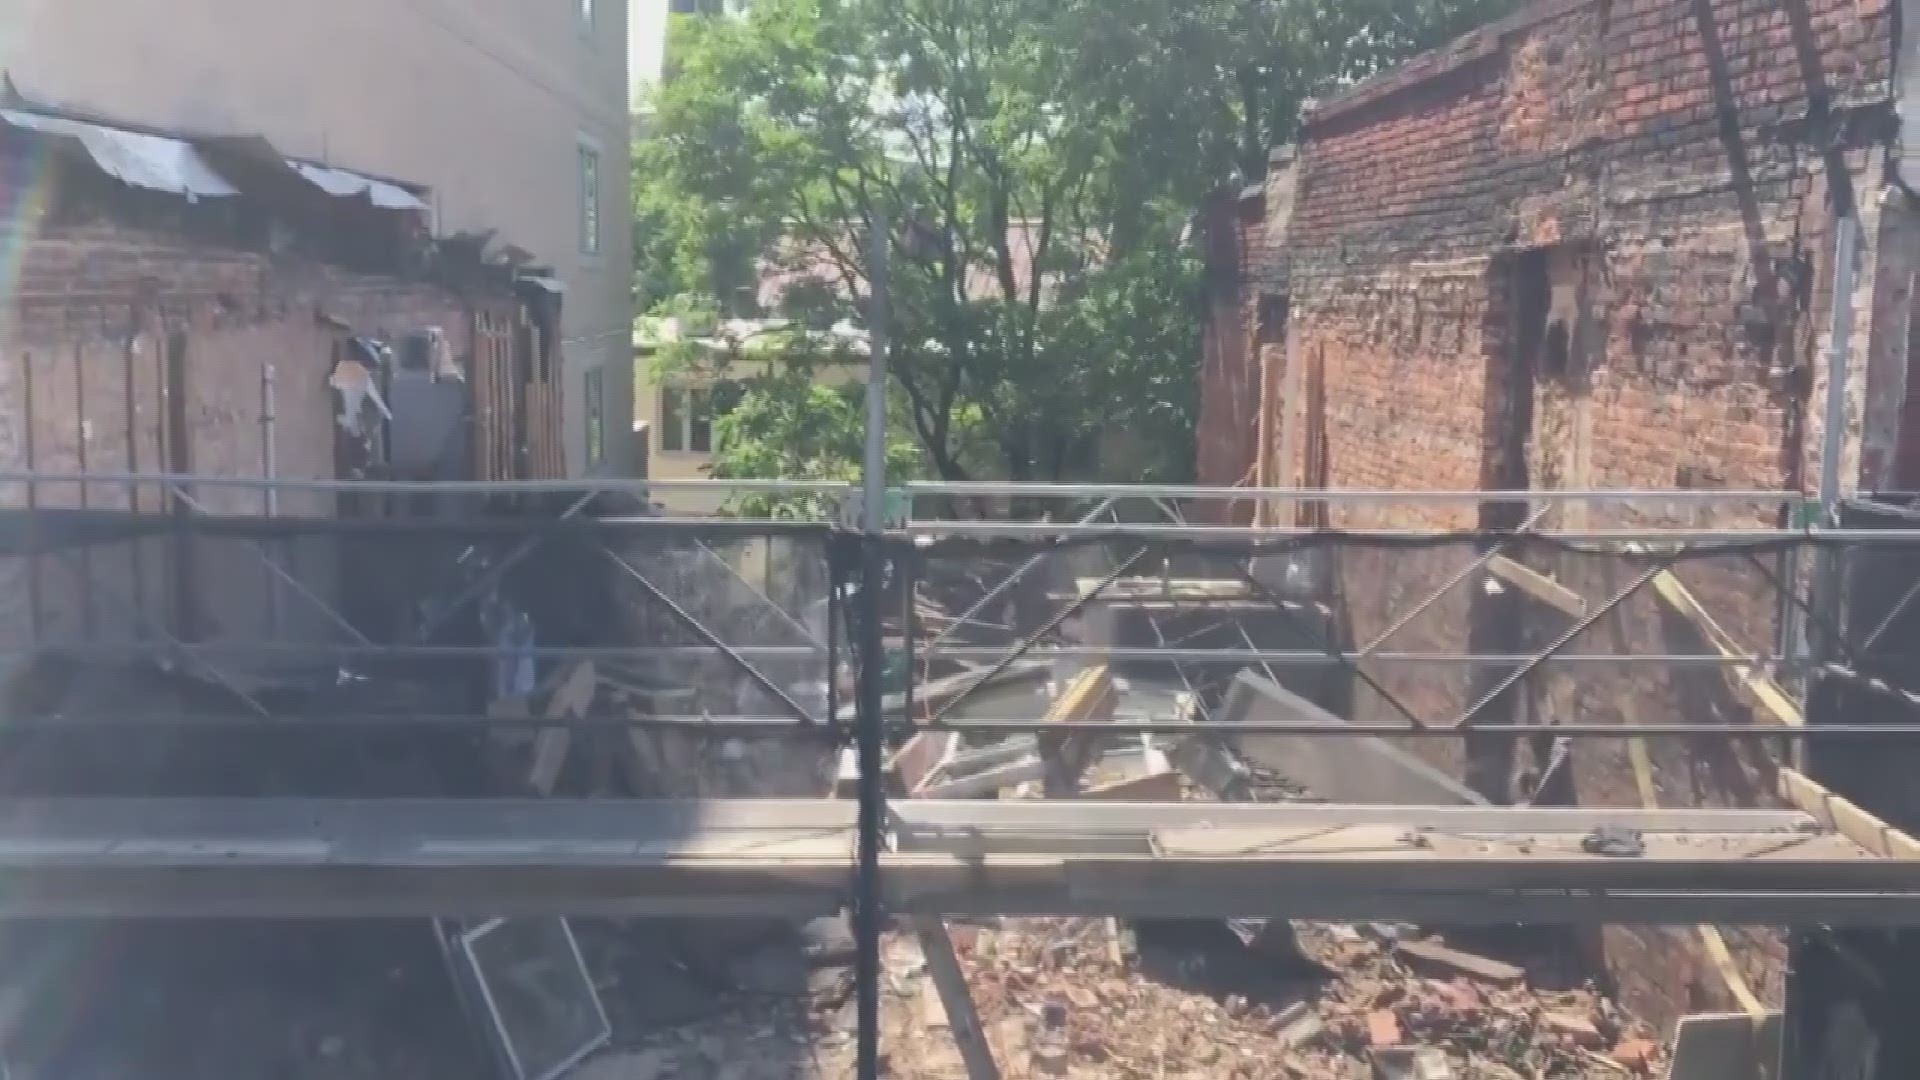 One person was seriously injured after a building collapsed in Northwest DC, fire officials said.